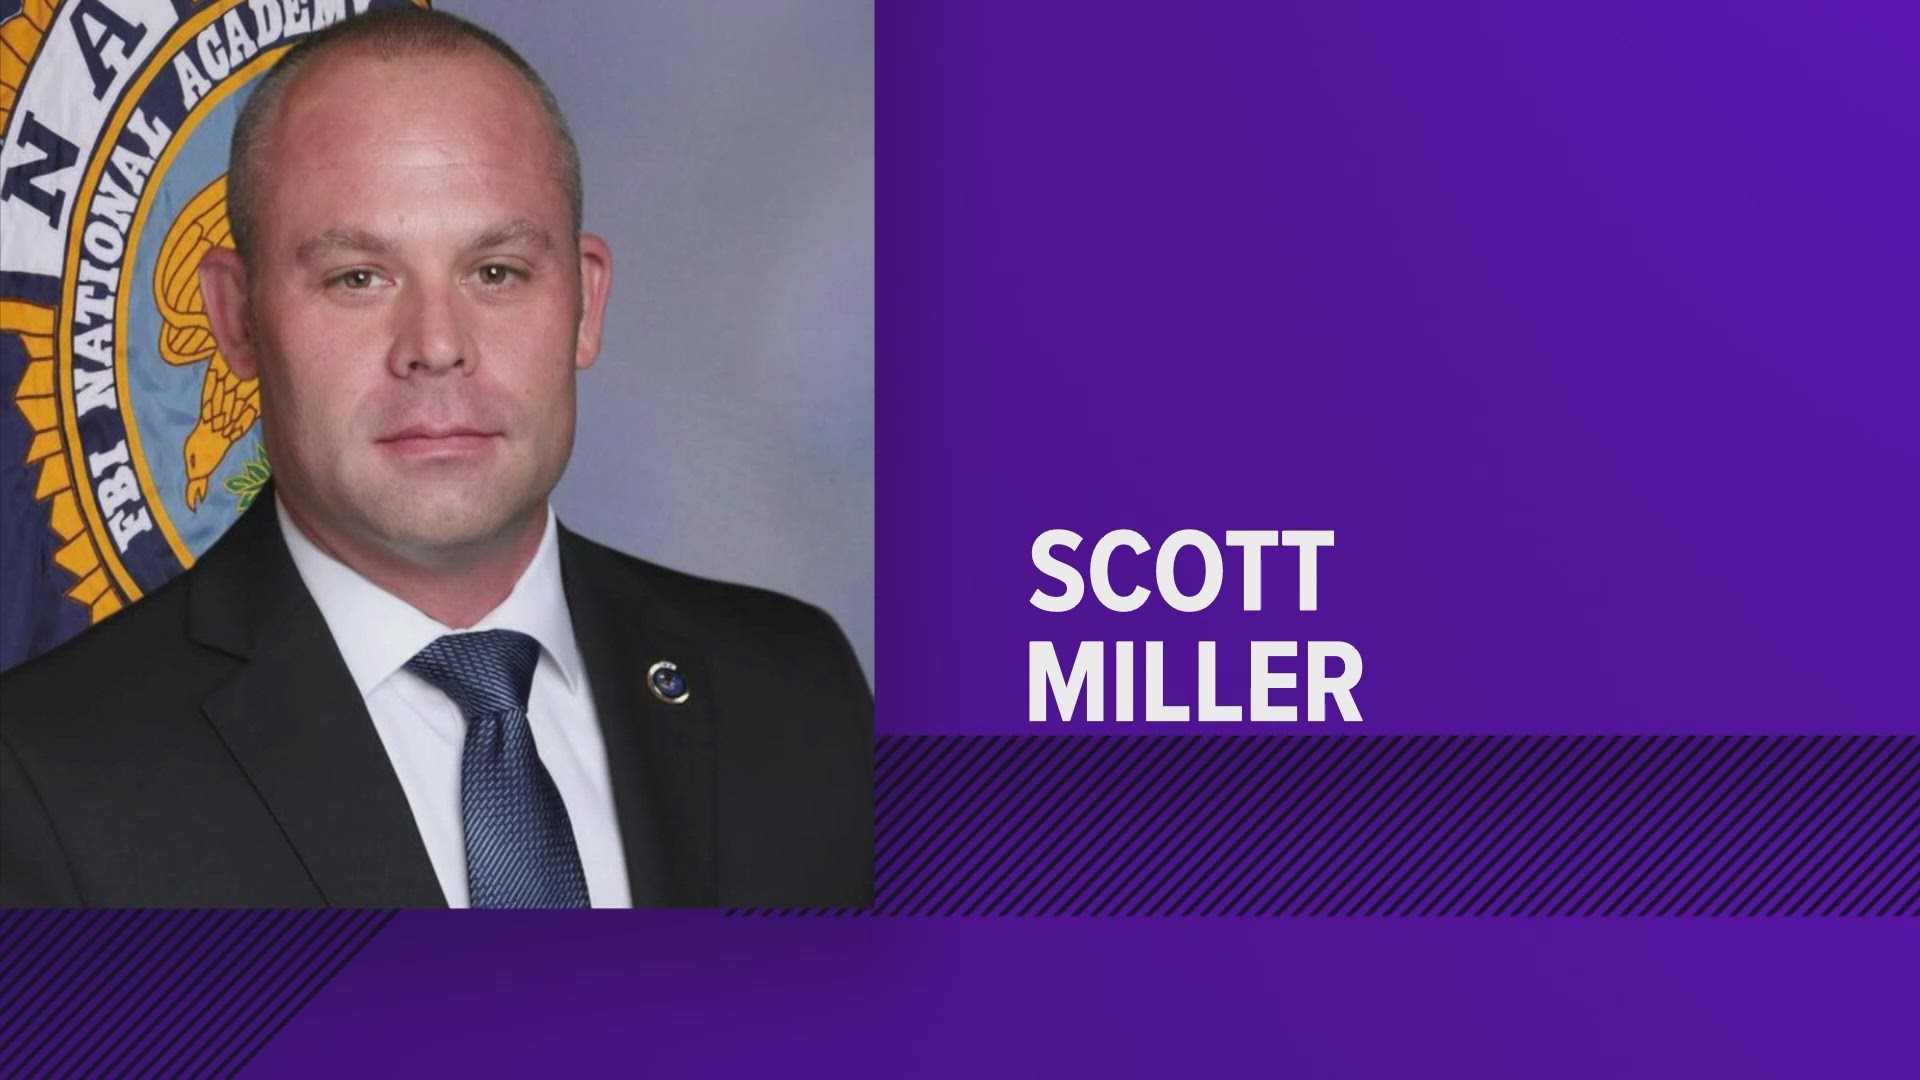 Scott Miller has officially taken over in the role after serving as interim chief.